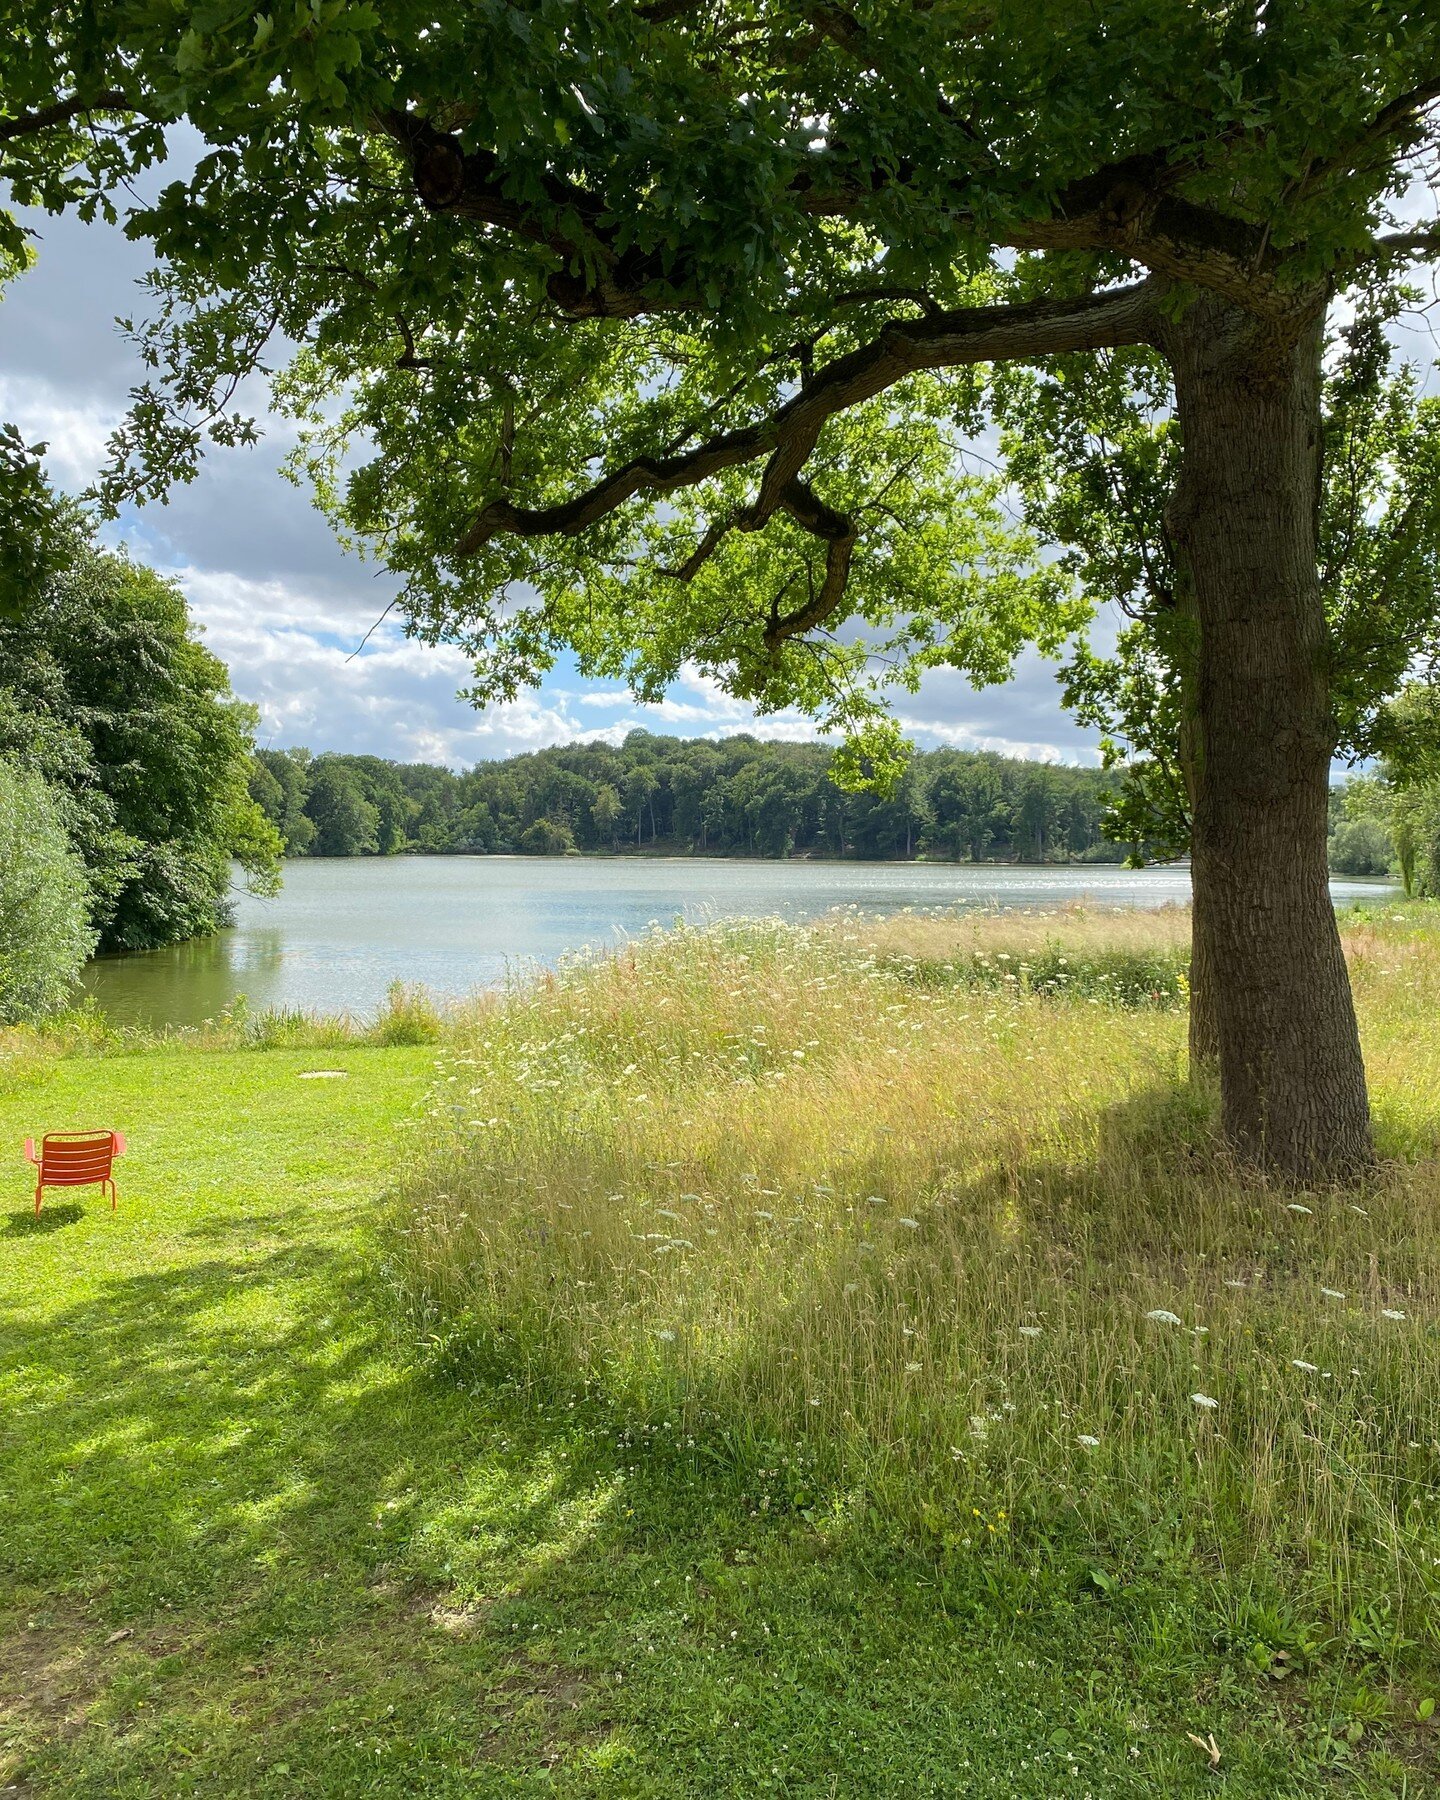 What a beautiful place to spend the weekend! 
North Germany can be a dream come true!